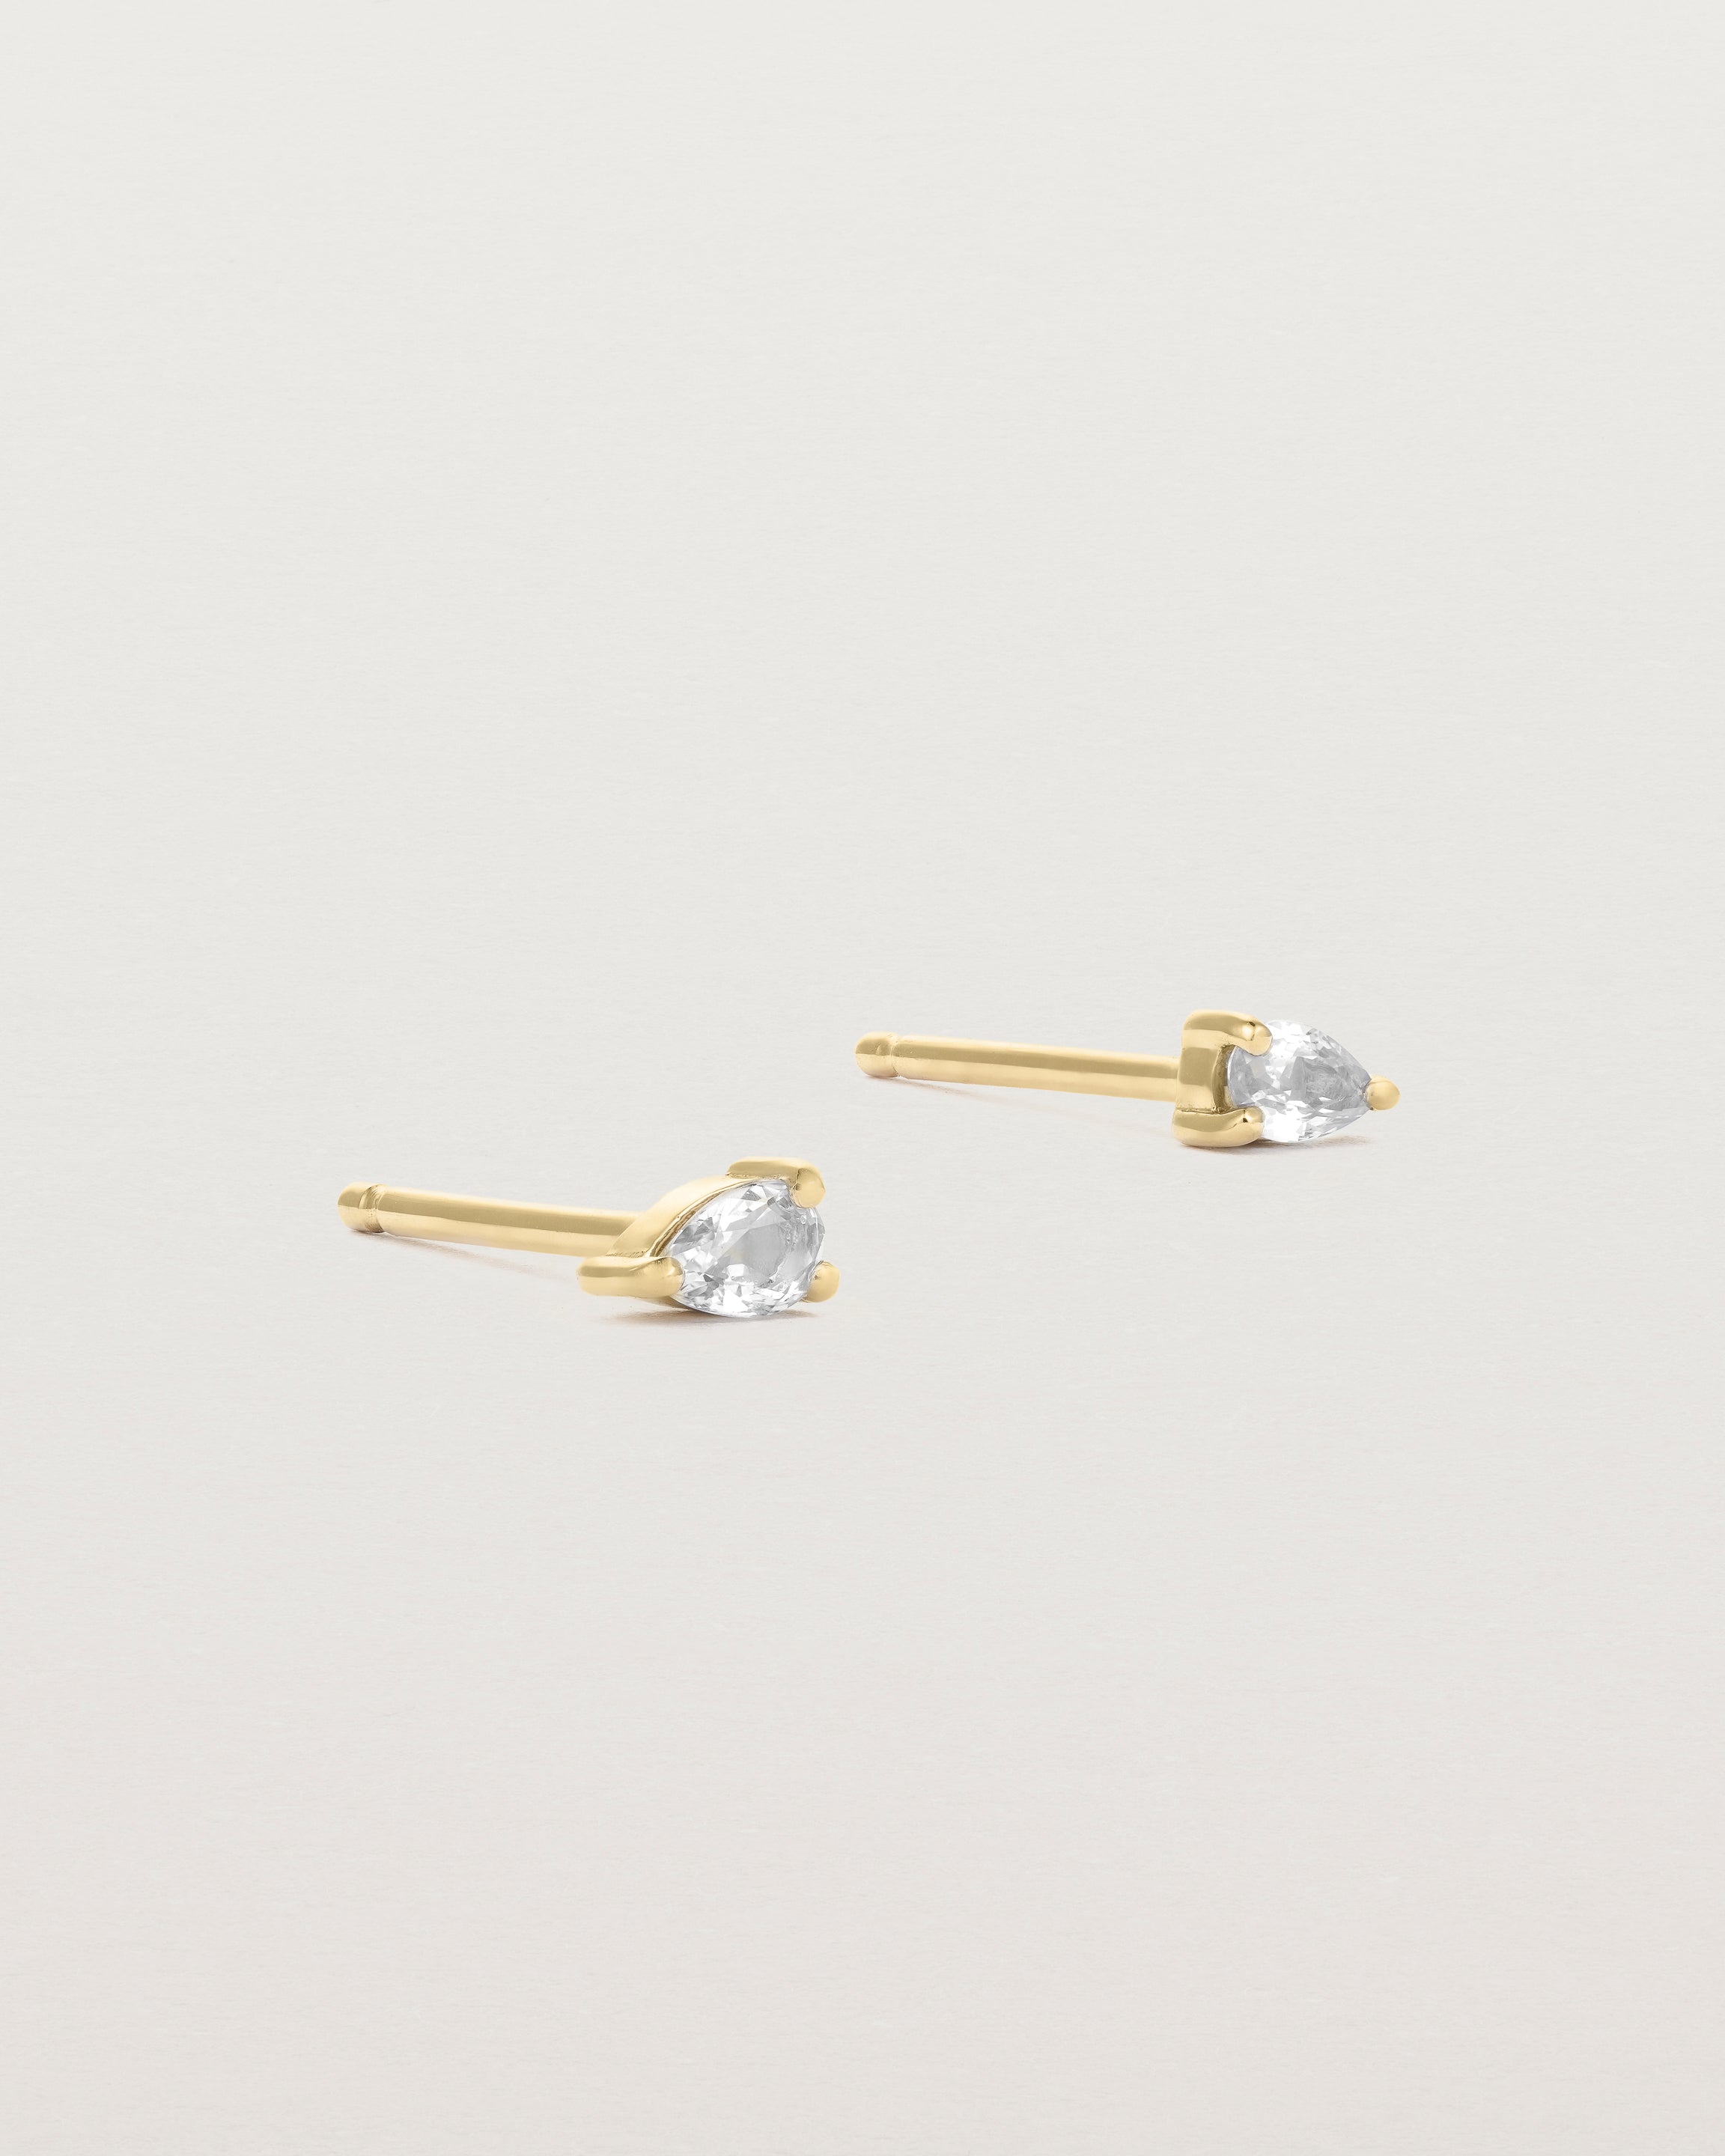 a pair of yellow gold studs featuring a pear cut diamond